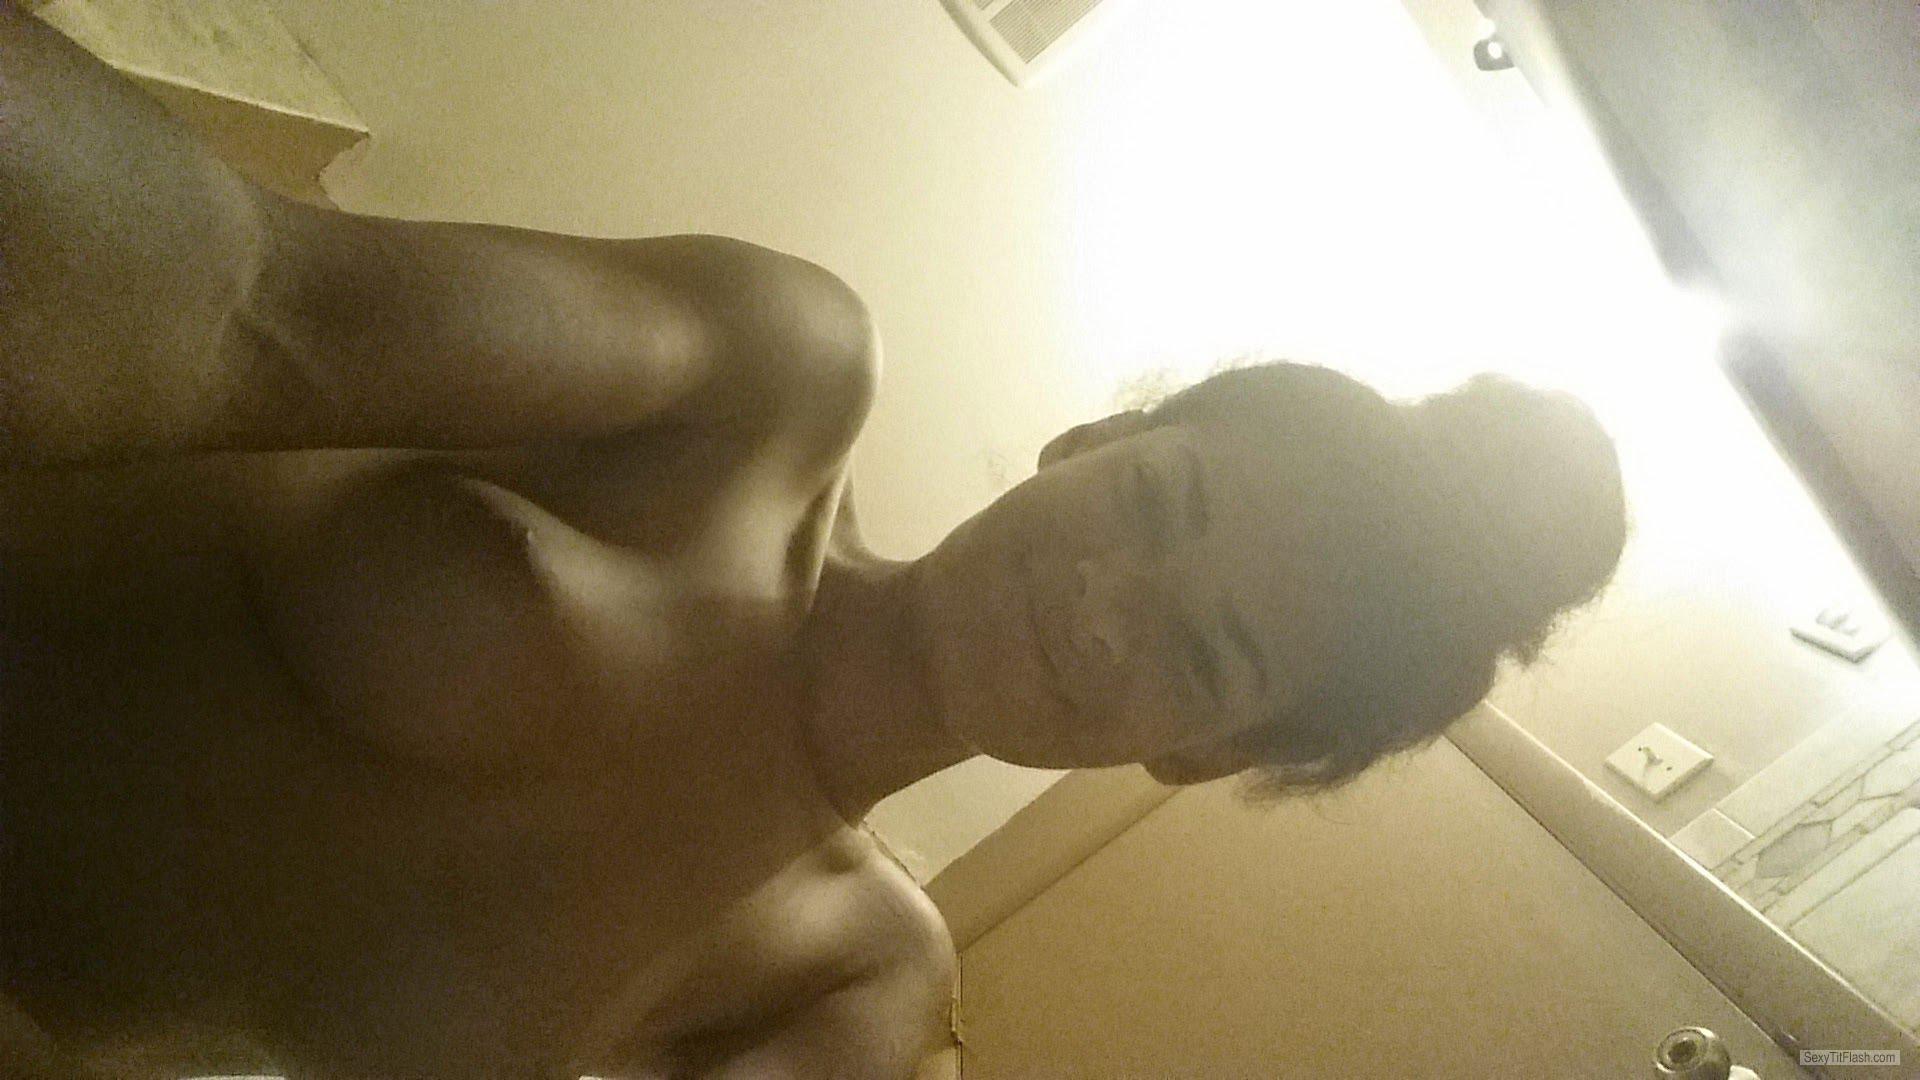 My Very small Tits Topless Selfie by Hot